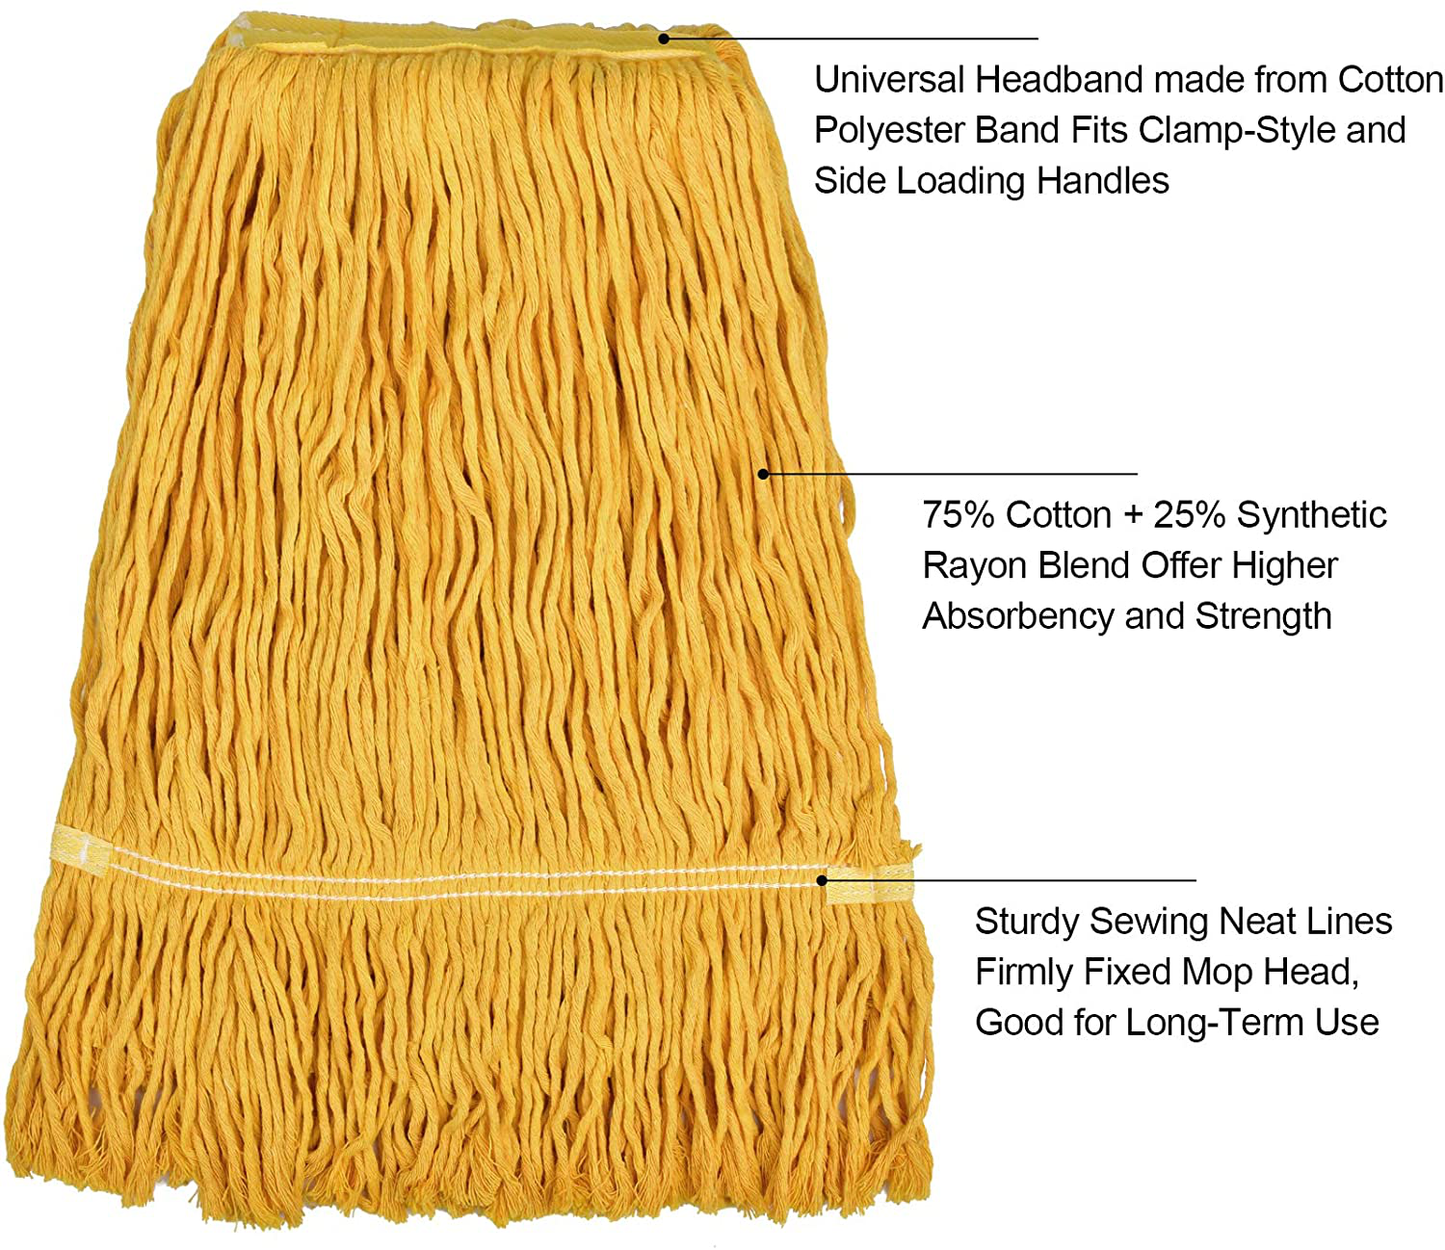 Mop Heads Replacements, 3 Pack Heavy Duty Commercial Cotton String Mops Refills, 14 Inch Wet Mop Headband Looped End String Head Refill for Home Industrial Floor Cleaning, Reusable Dirt Hair Sweeper